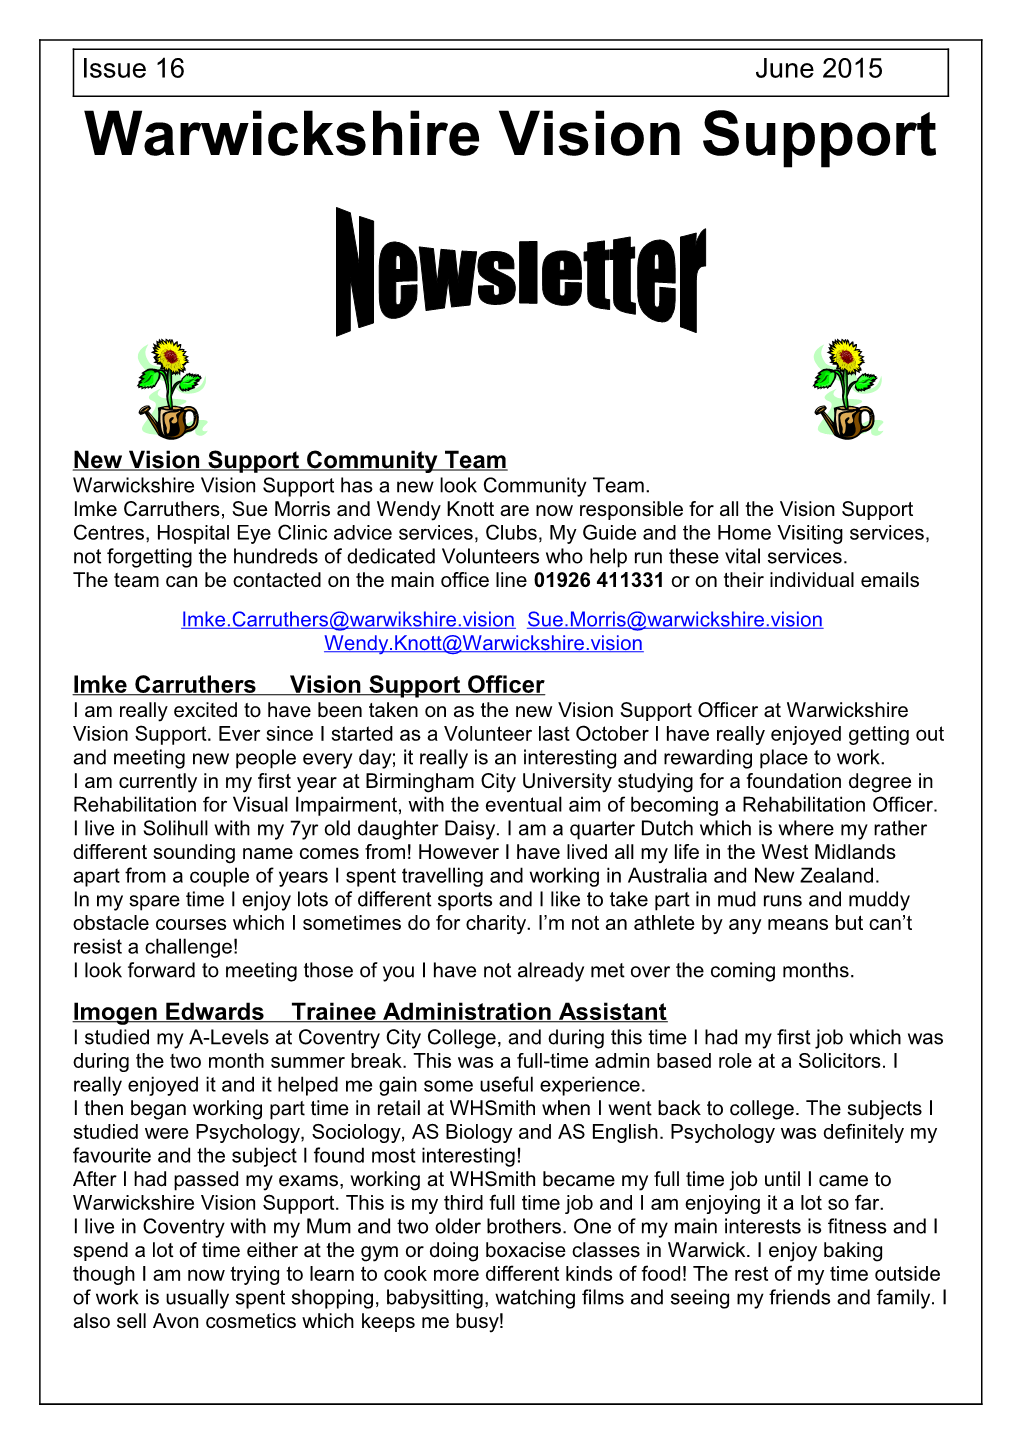 Your News Letter